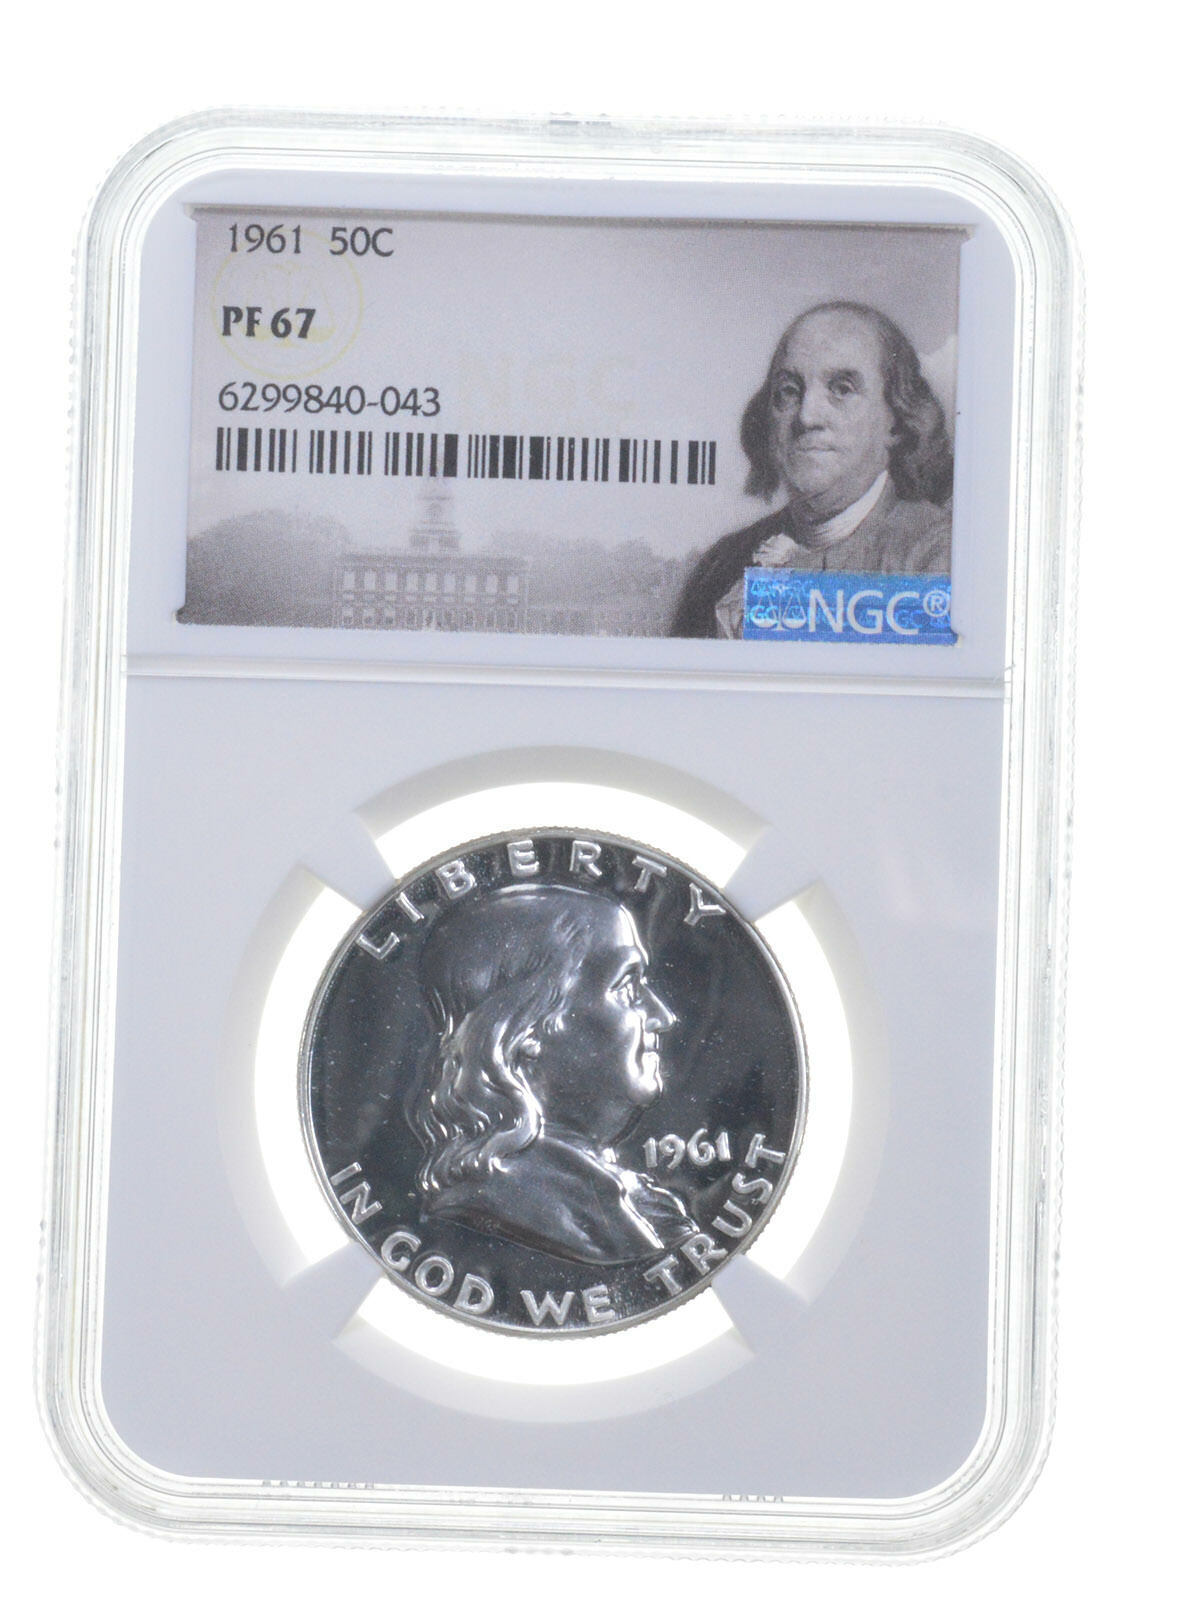 SEAL Cheap super special price limited product 1961 PF67 Proof Franklin Half Dollar - White Coin Graded NGC Spo